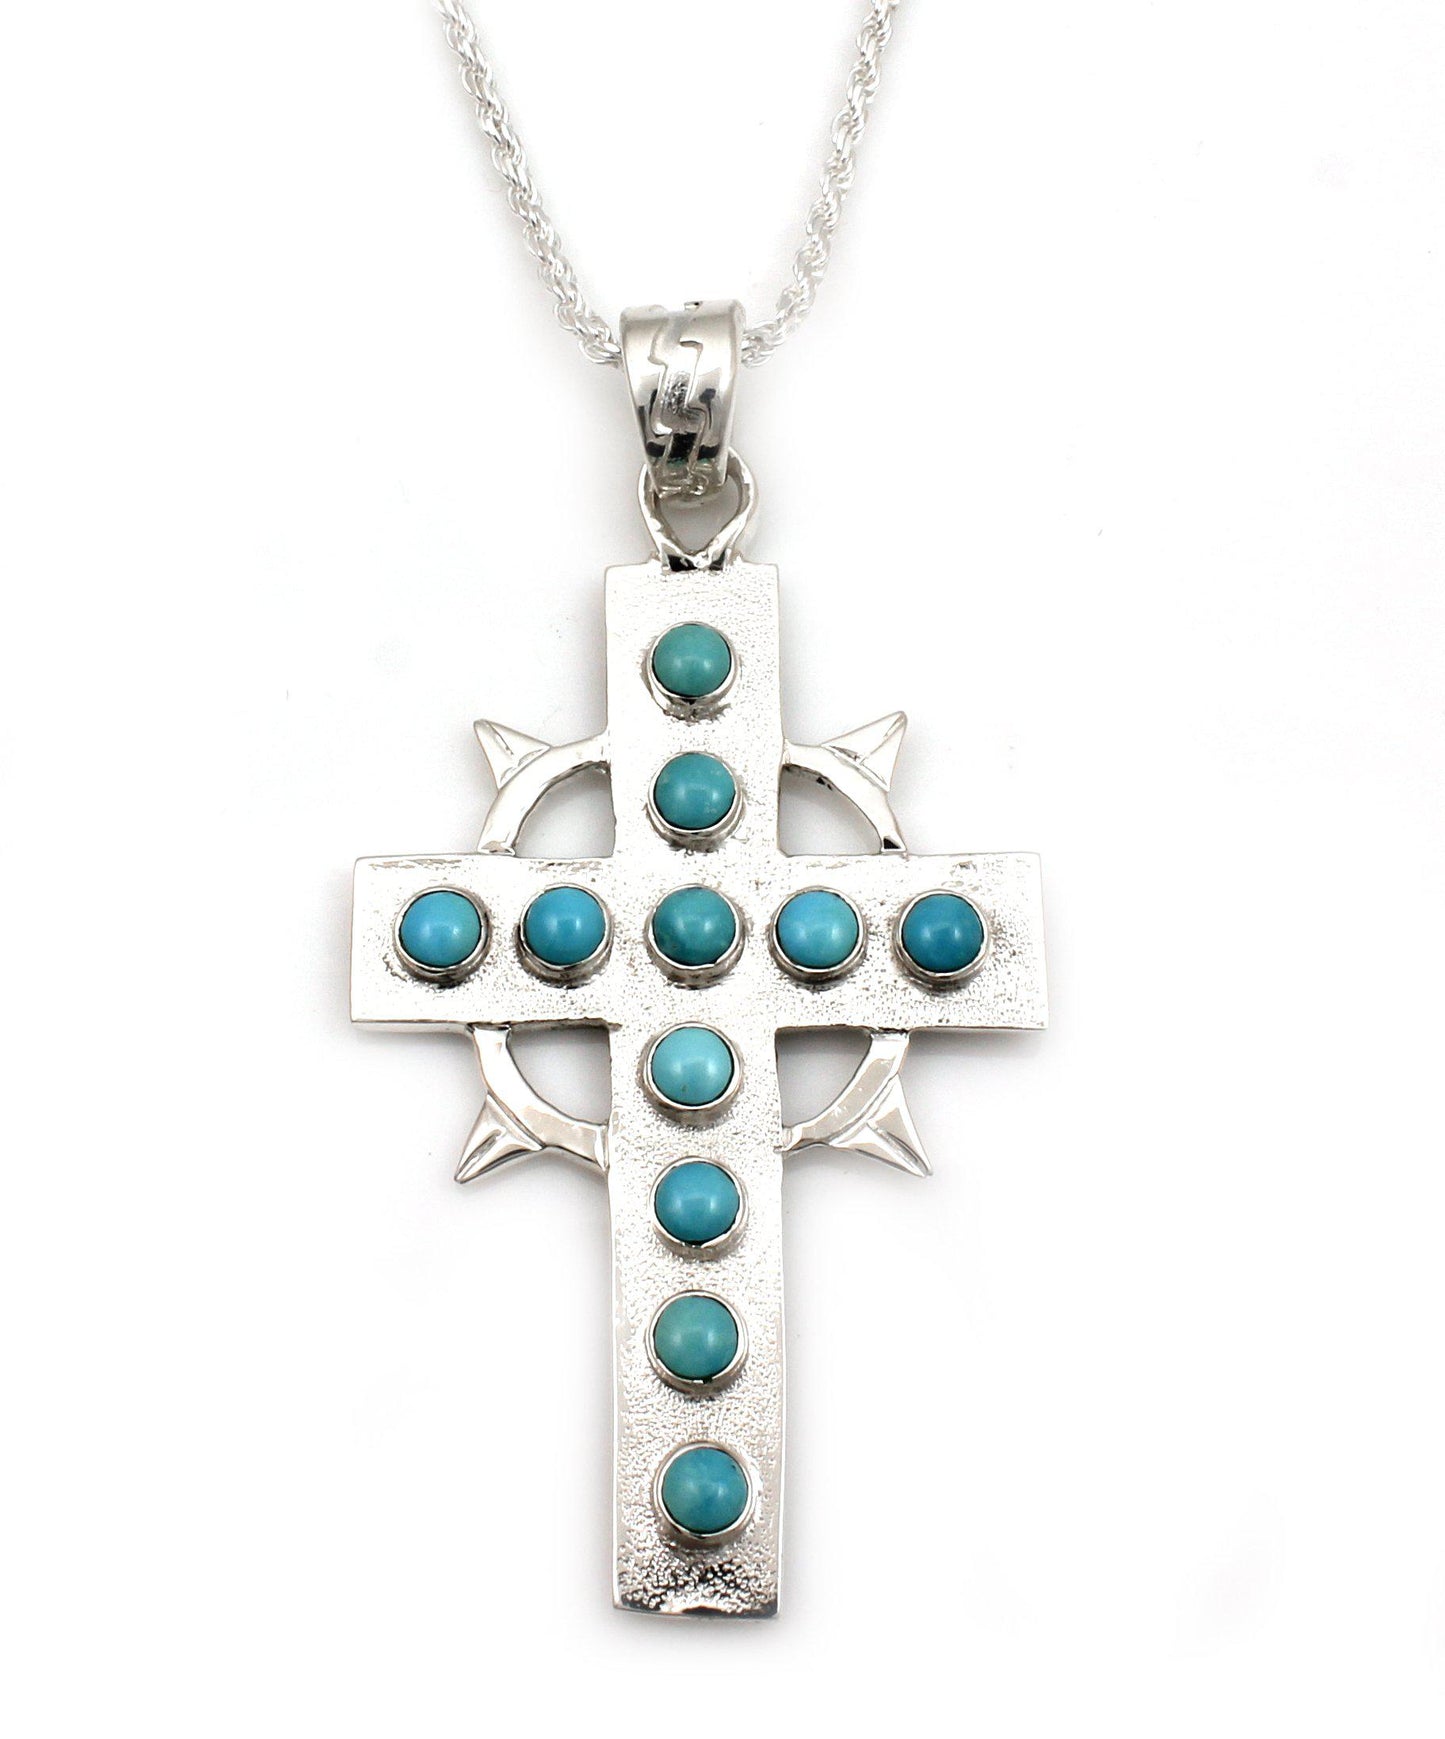 Spikes and Circle Cross Pendant-Jewelry-Ben Nighthorse-Sorrel Sky Gallery